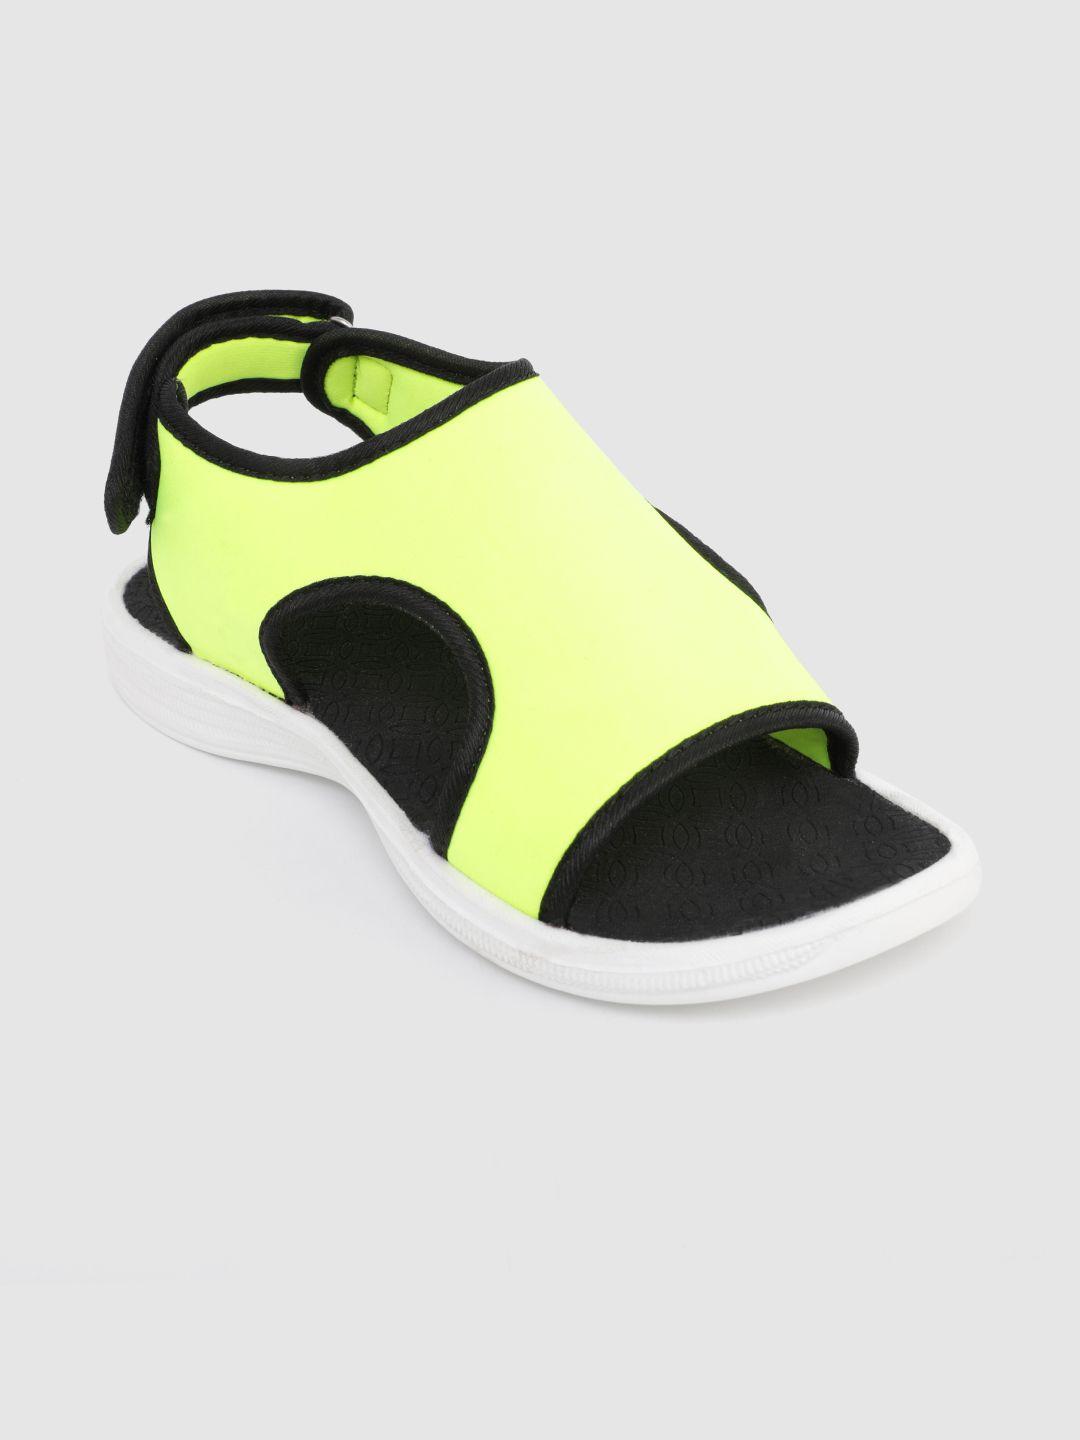 kook n keech women yellow solid sports sandals with cut-out detail